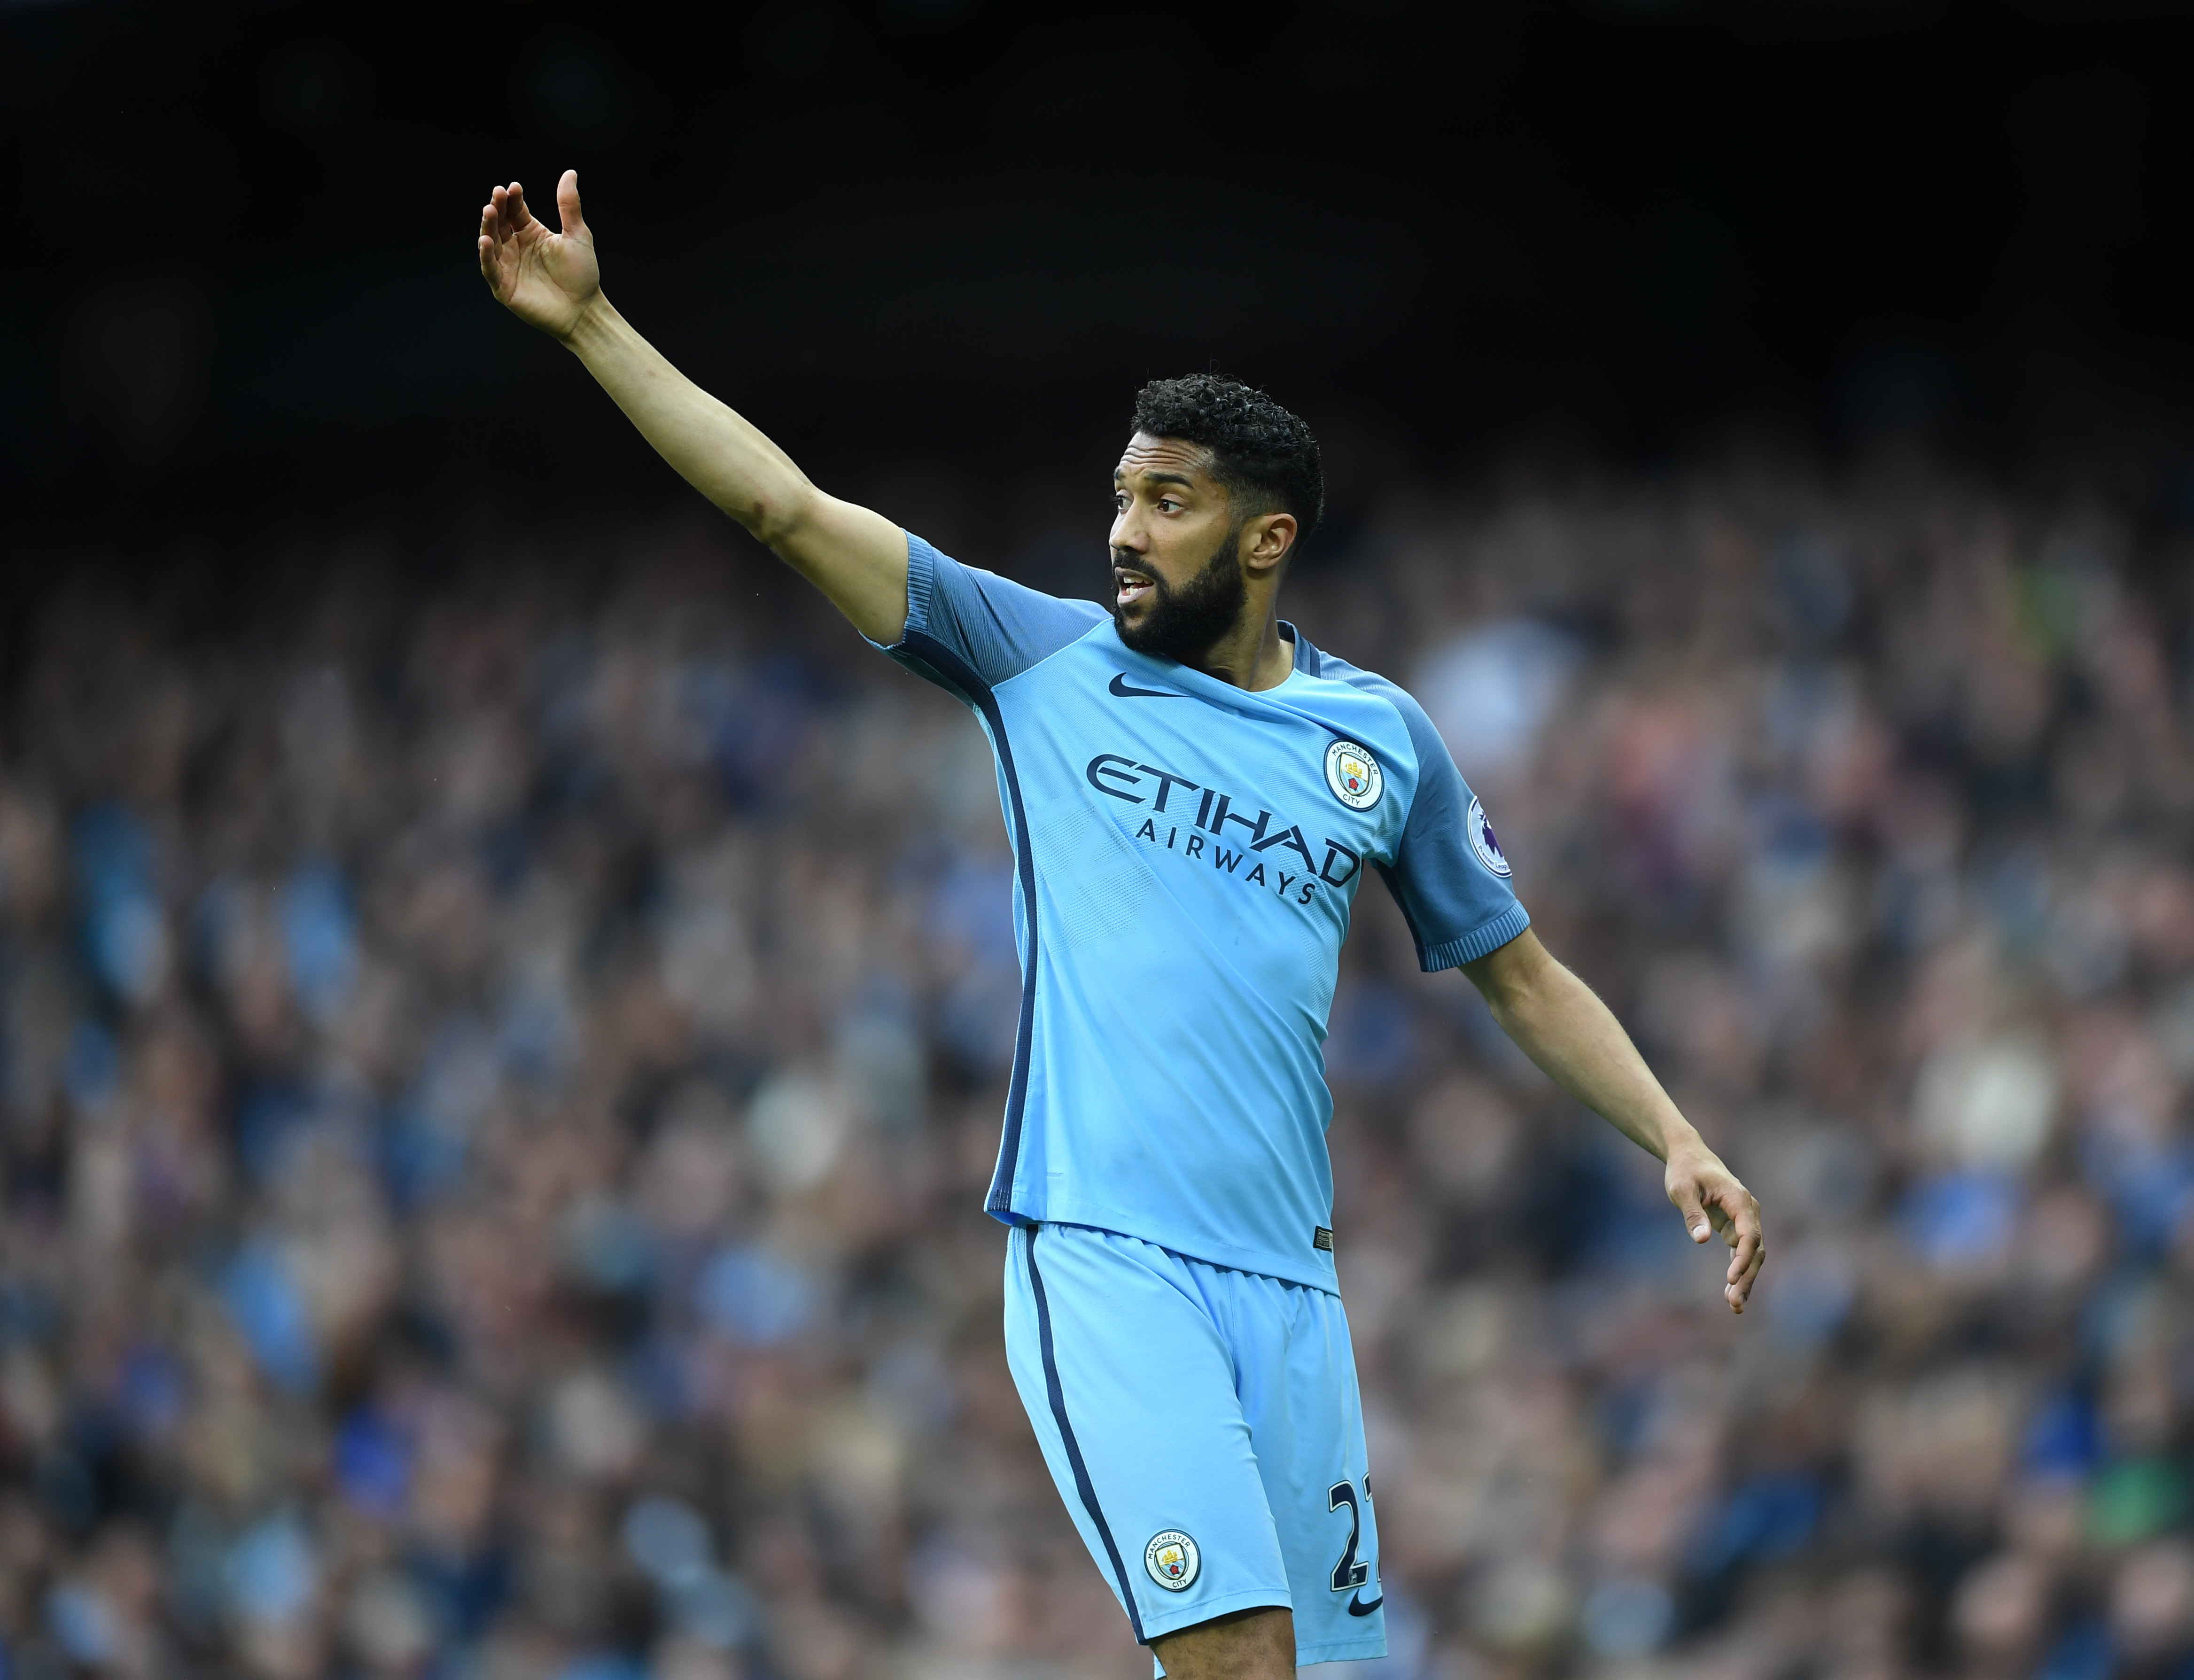 MANCHESTER, ENGLAND - MAY 13:  Gael Clichy of Manchester City looks no  during the Premier League match between Manchester City and Leicester City at Etihad Stadium on May 13, 2017 in Manchester, England.  (Photo by Laurence Griffiths/Getty Images)